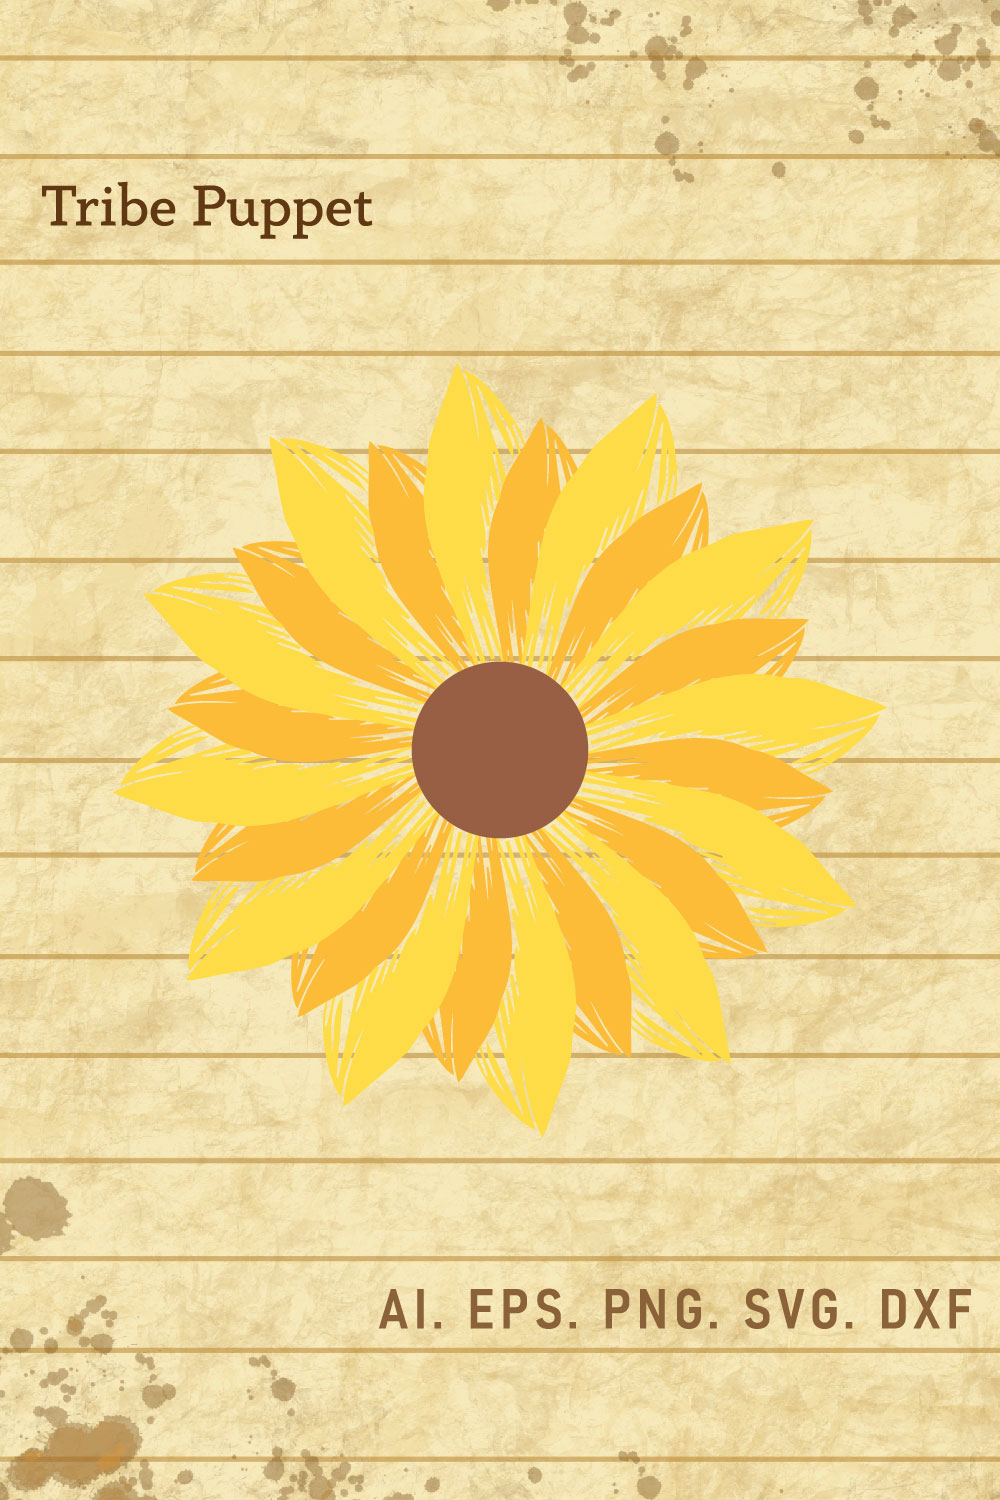 Sunflower 6 pinterest preview image.